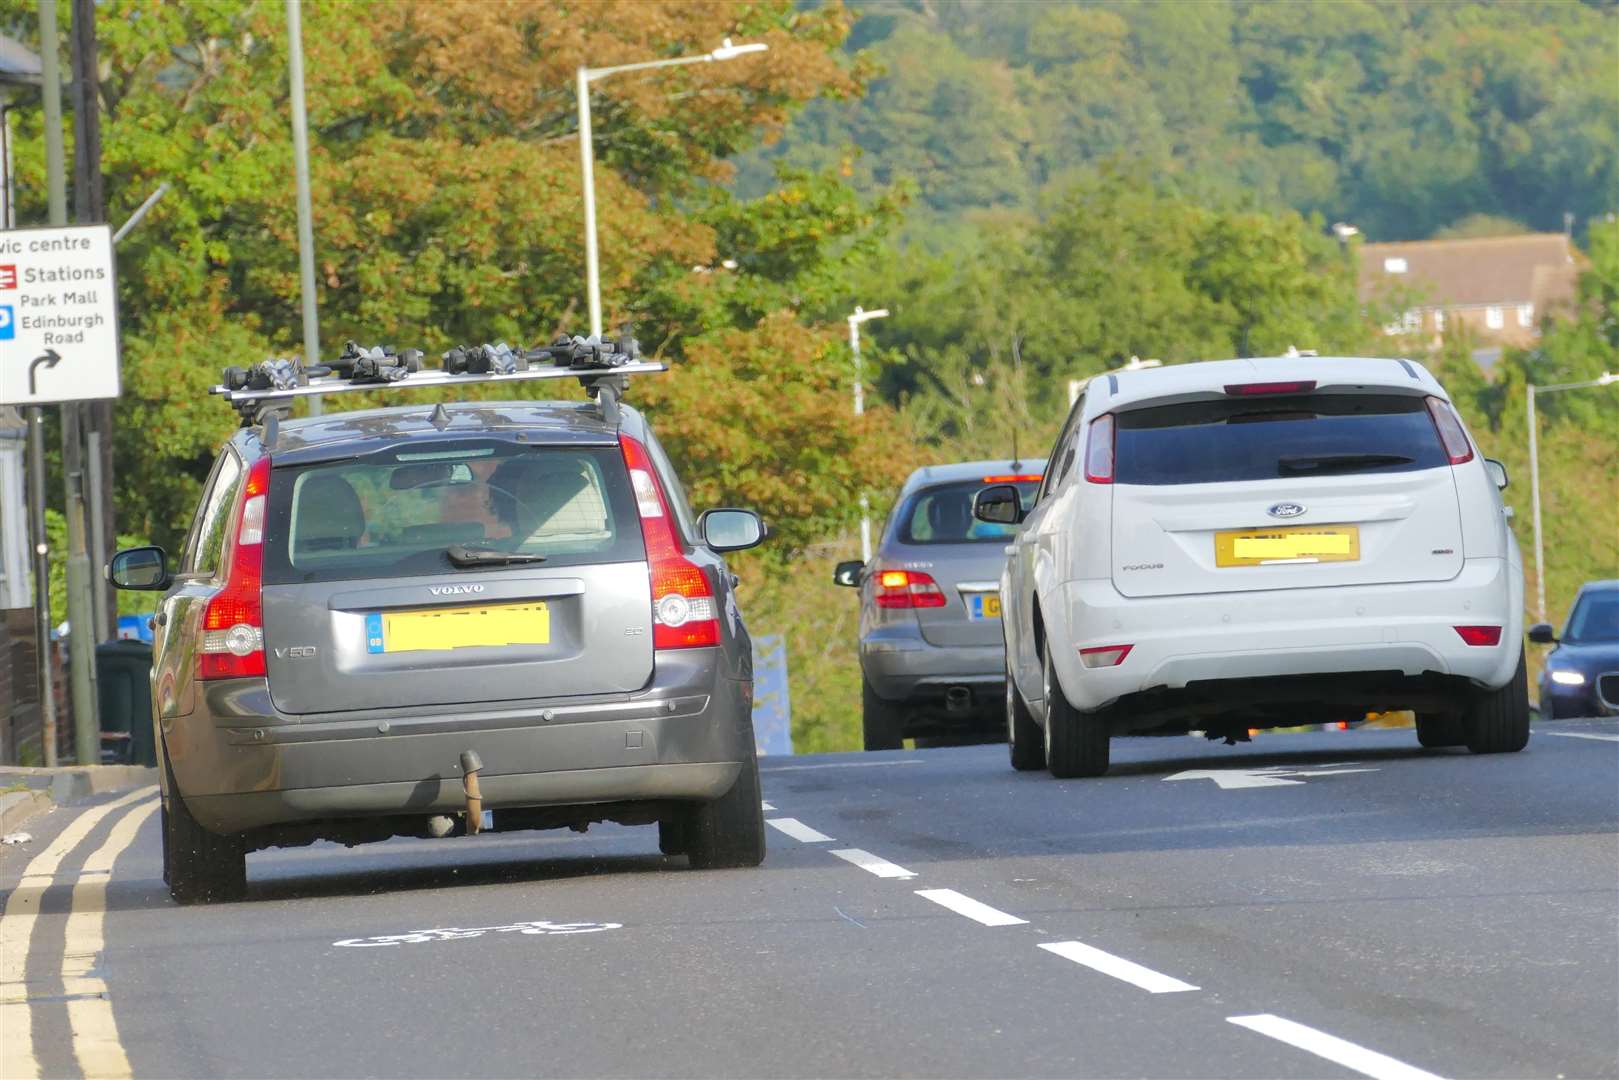 Drivers were spotted using the cycle lanes last week. Picture: Andy Clark